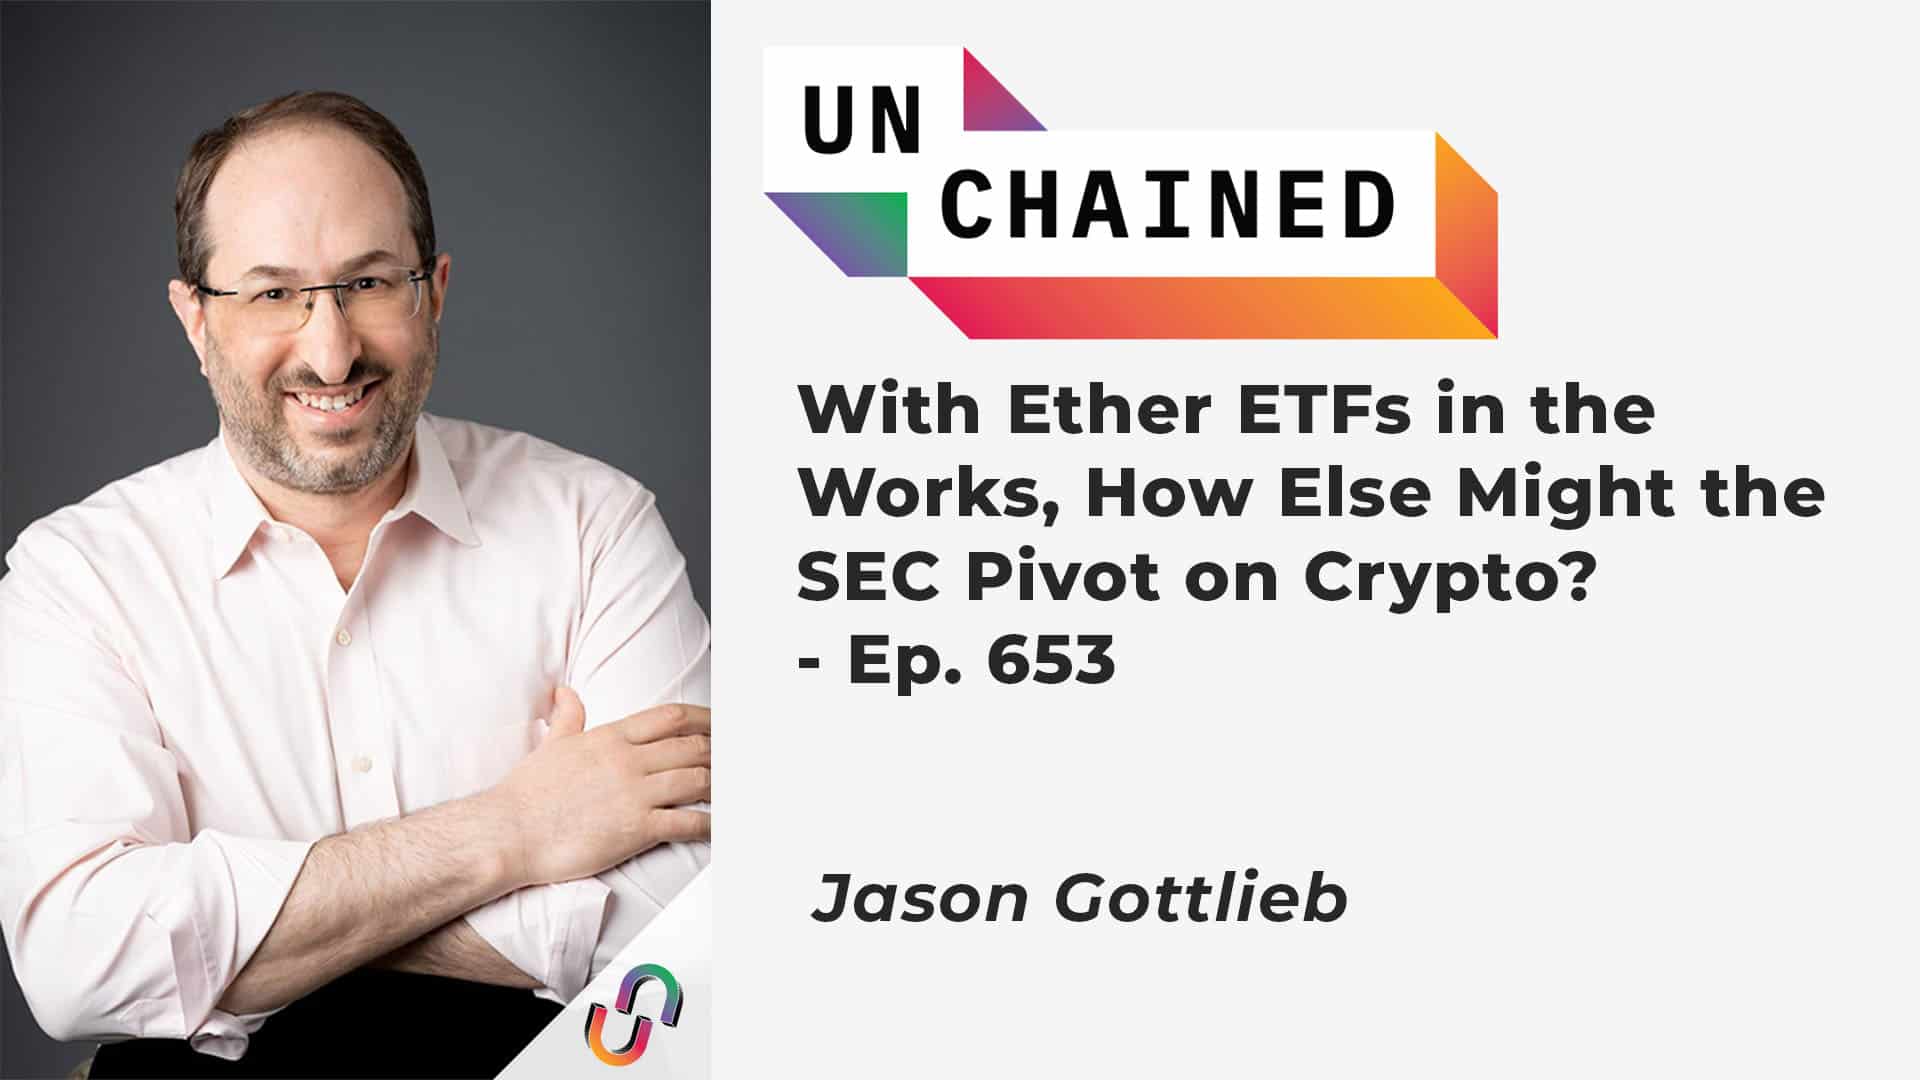 With Ether ETFs in the Works, How Else Might the SEC Pivot on Crypto? - Ep. 653